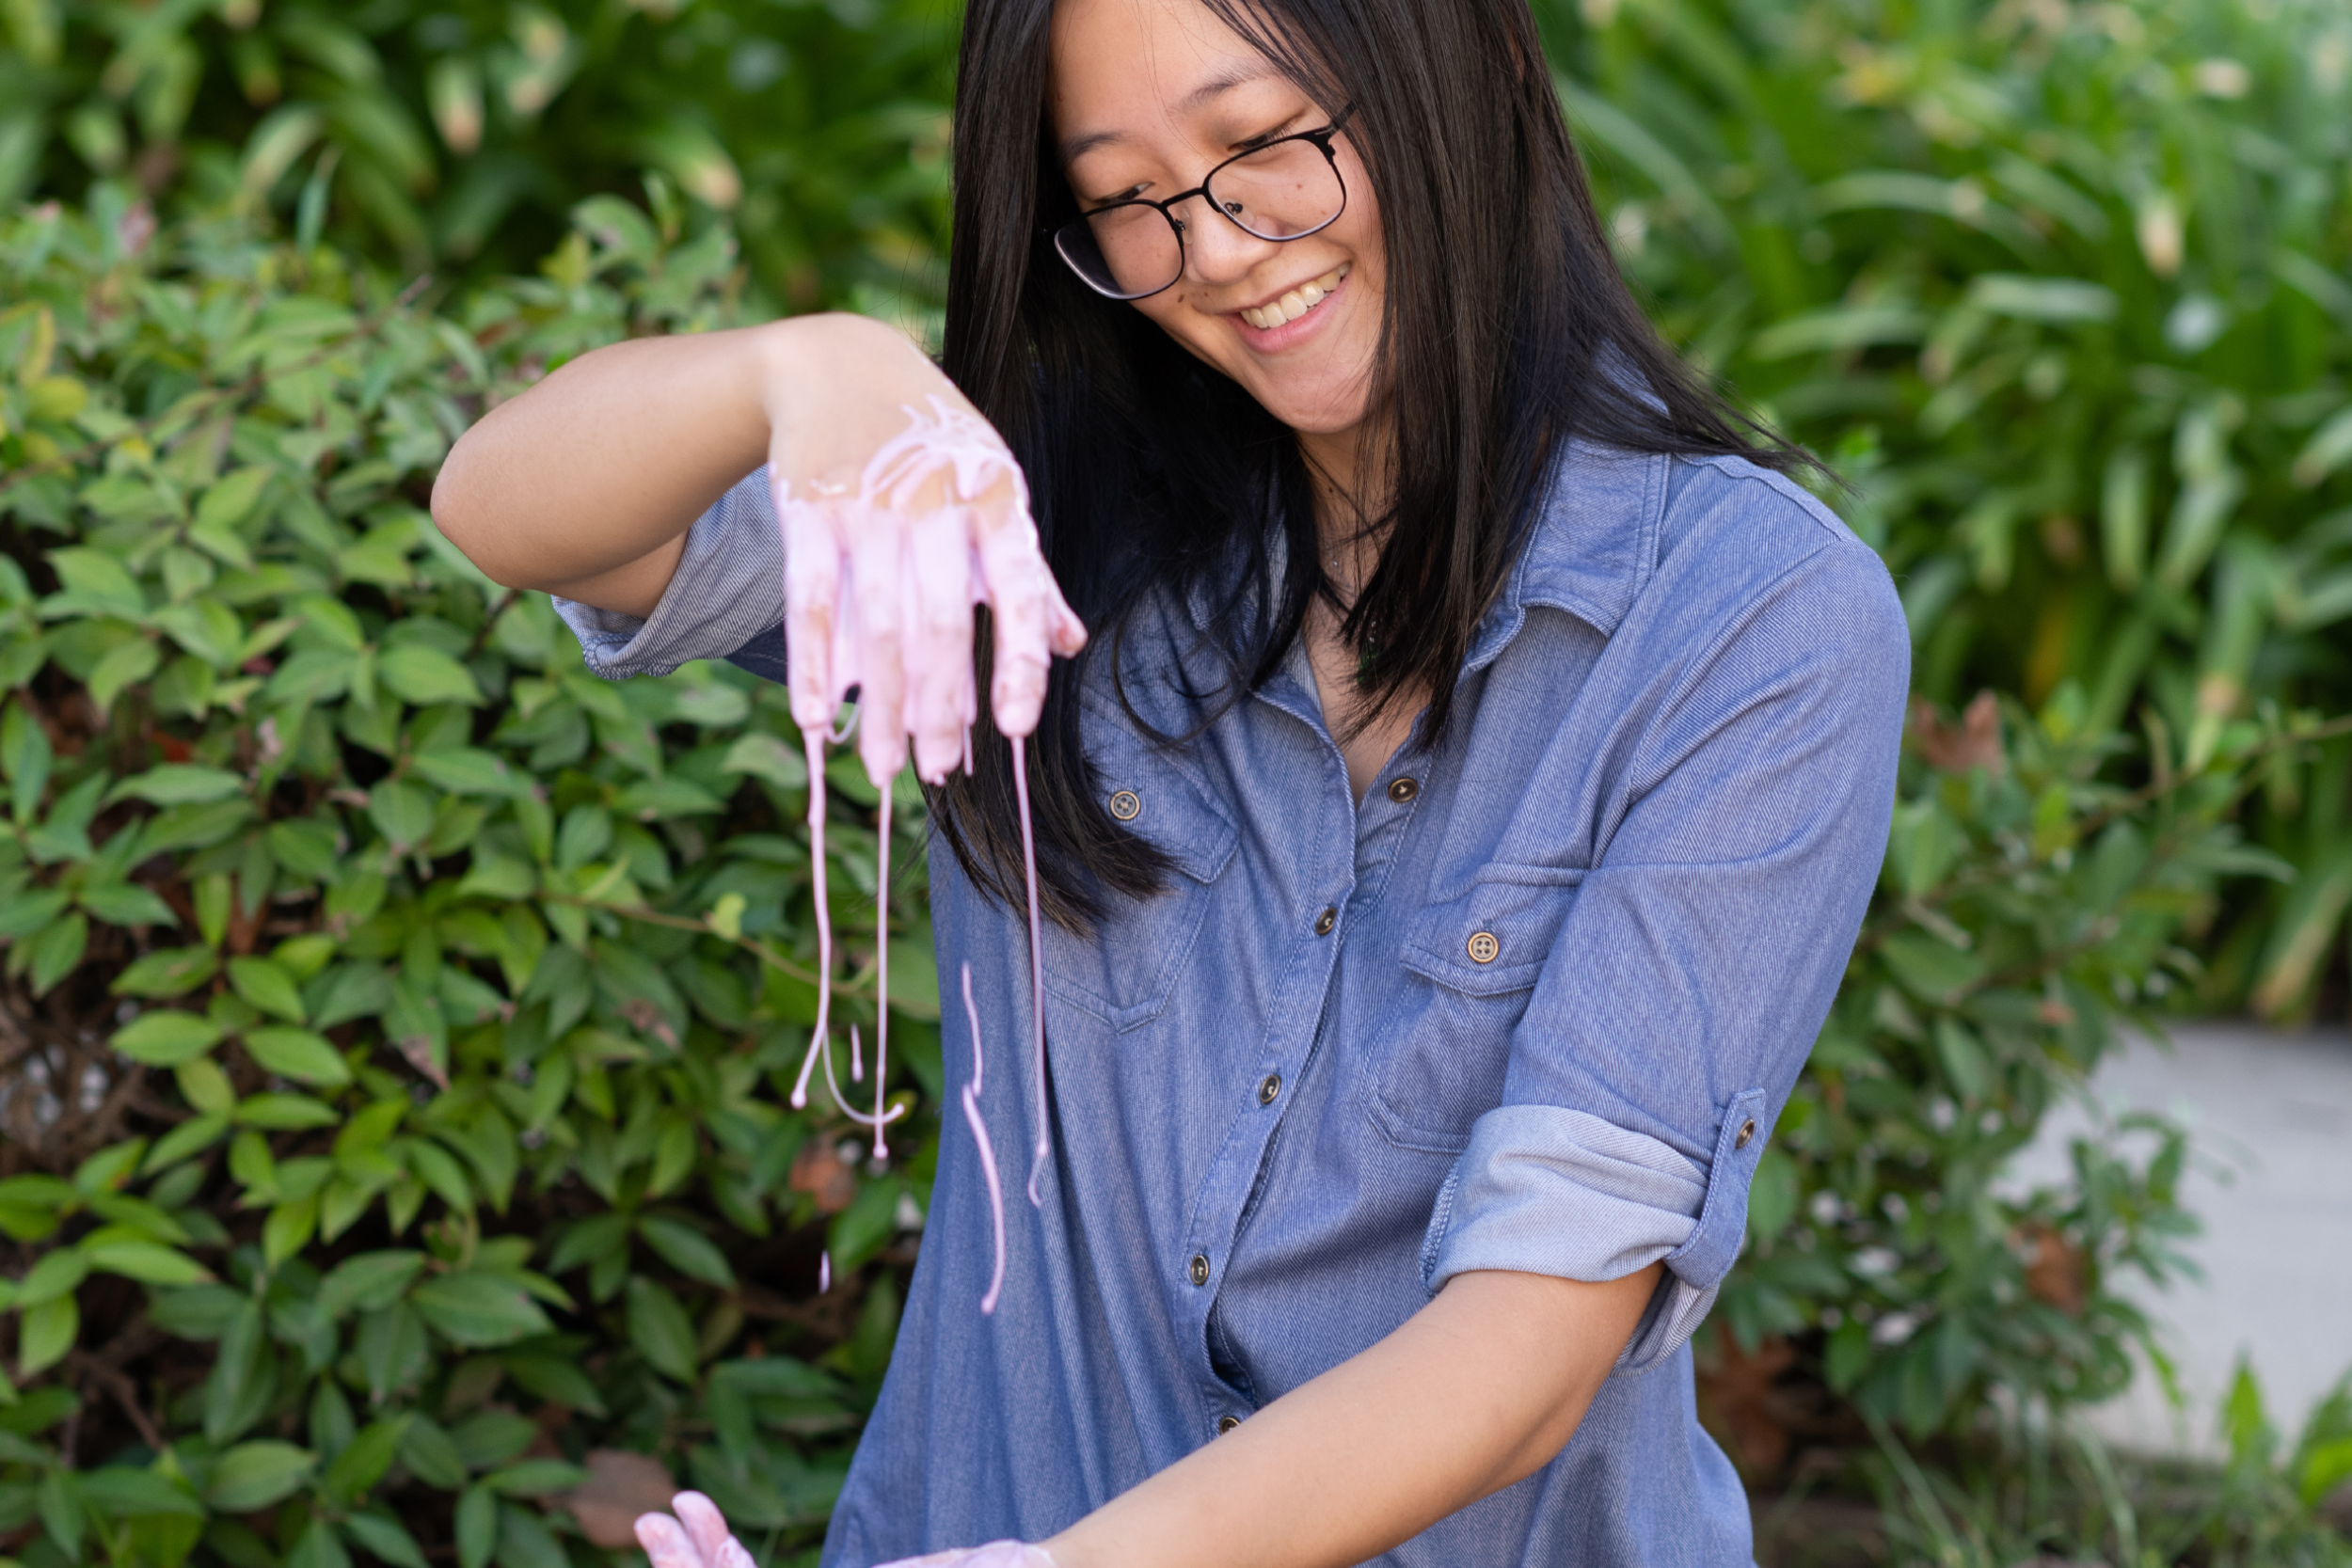 Laurie Tan in a blue jean button-up shirt with sleeves rolled up, sitting on grass and smiling as she plays with a pink, gooey substance, green plants in the background